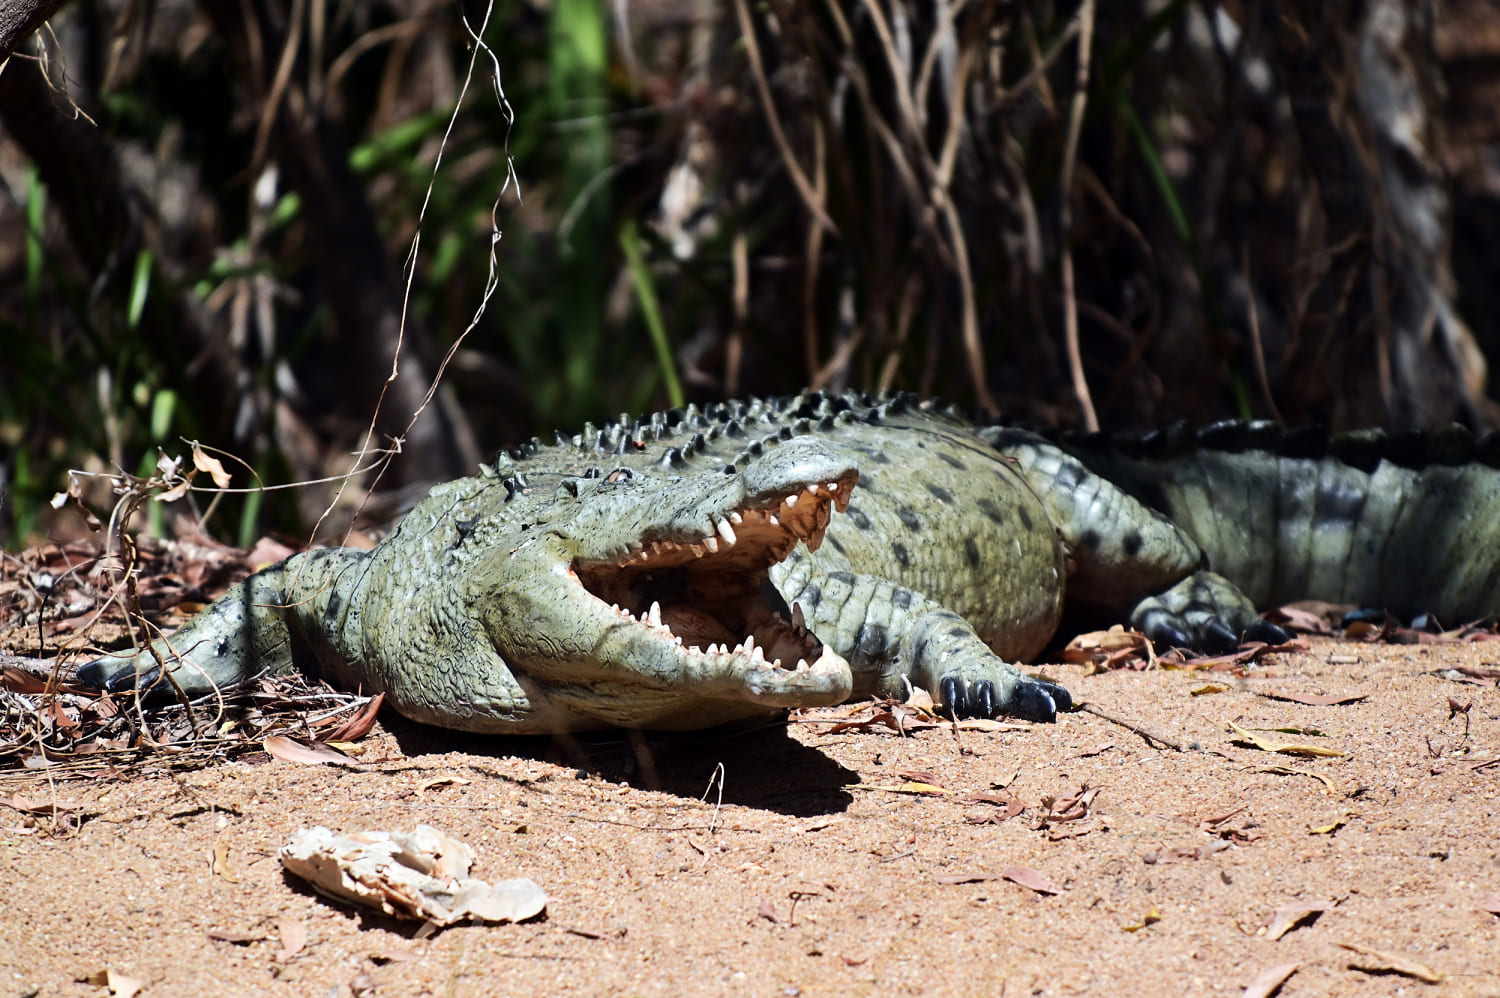 Crocodiles cannot outnumber people in Australian territory where girl was killed, leader says